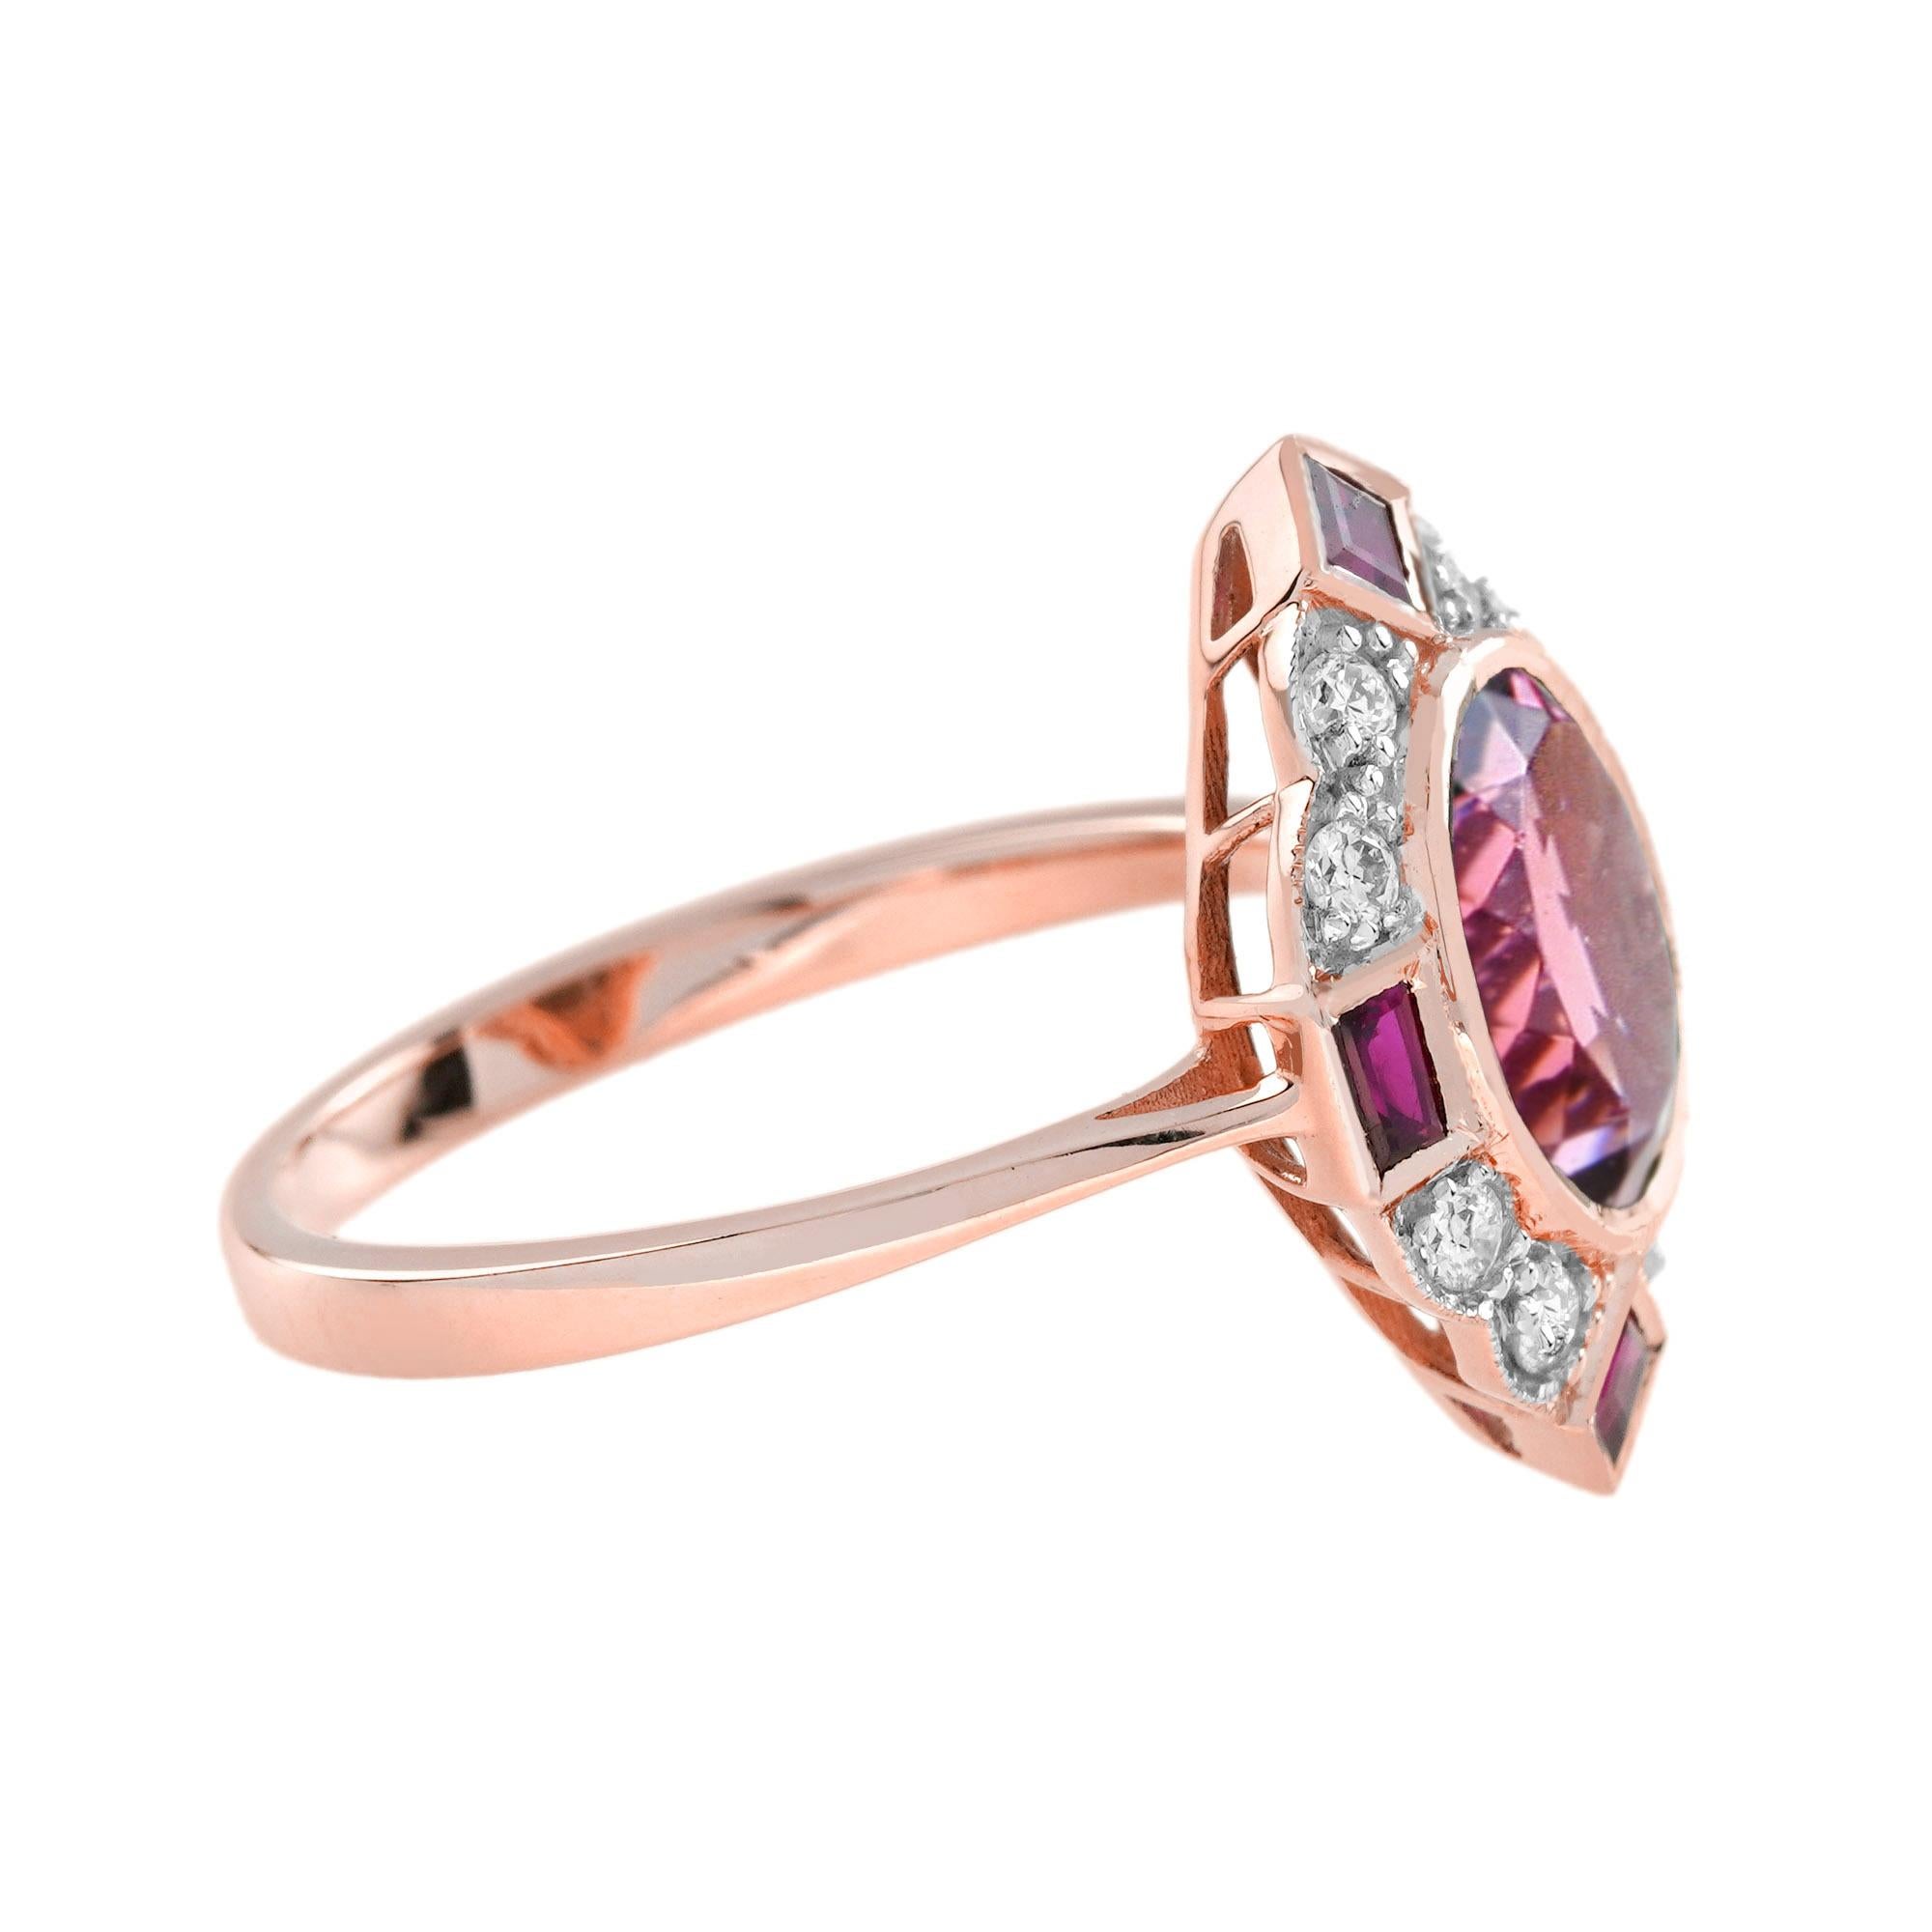 For Sale:  2.20 Ct. Tourmaline Ruby Diamond Vintage Inspired Engagement Ring in 14K Gold 4